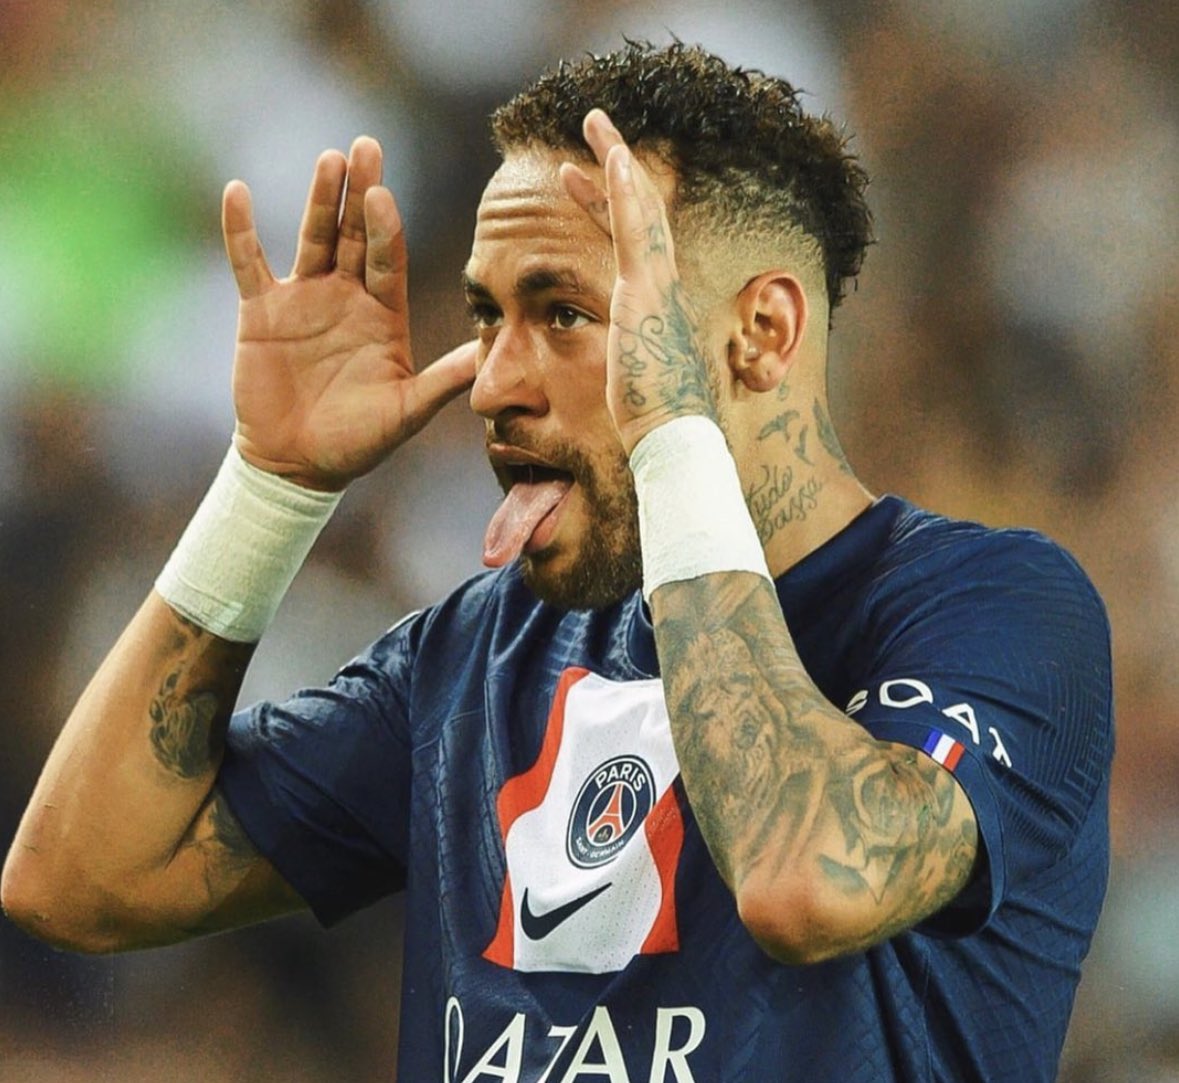 Fabrizio Romano - 🚨 𝐔𝐏𝐃𝐀𝐓𝐄: Neymar Jr deal advancing with Al Hilal  and 𝐍𝐎 chance for loan to Barça 🔵🇸🇦 ◉ As revealed with the exclusive  news overnight, Neymar is close to